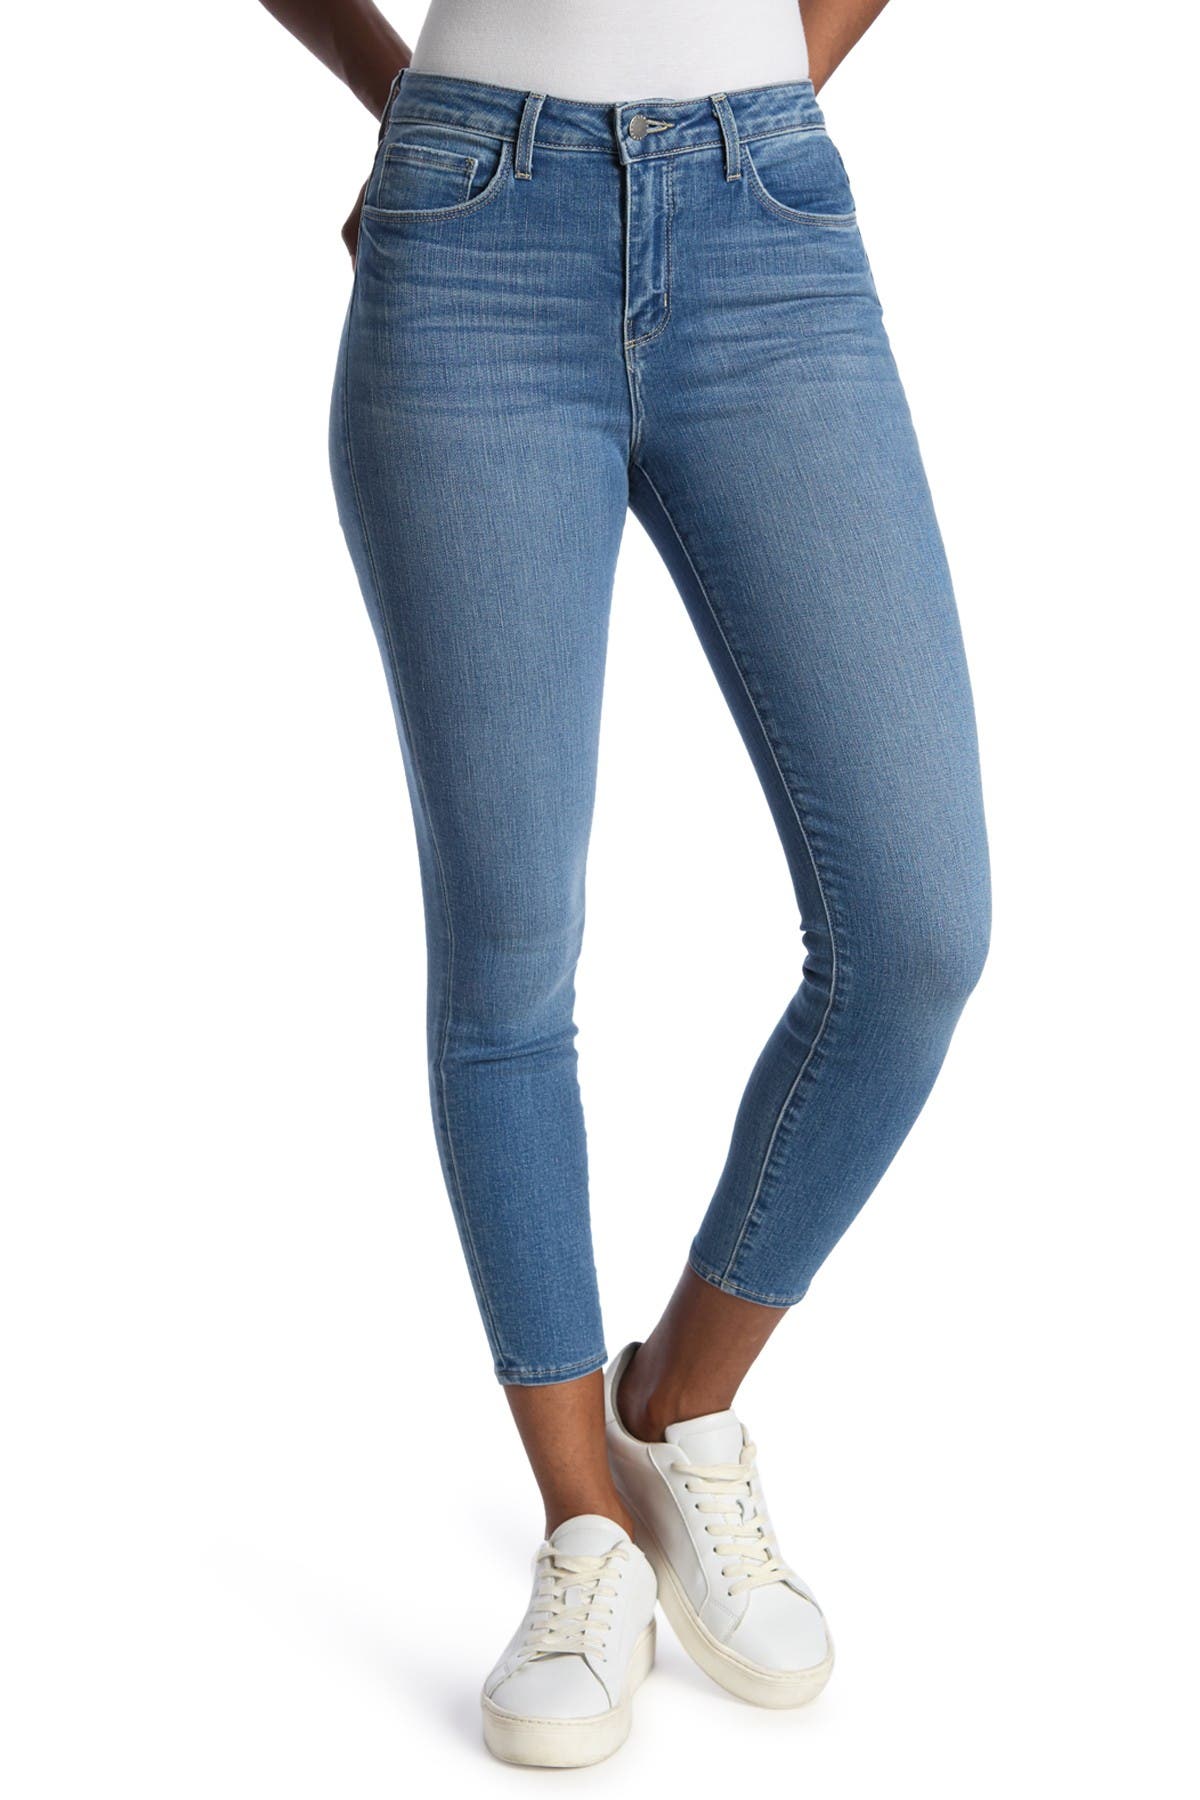 L Agence Margo High Rise Ankle Crop Skinny Jeans In Medium Blue3